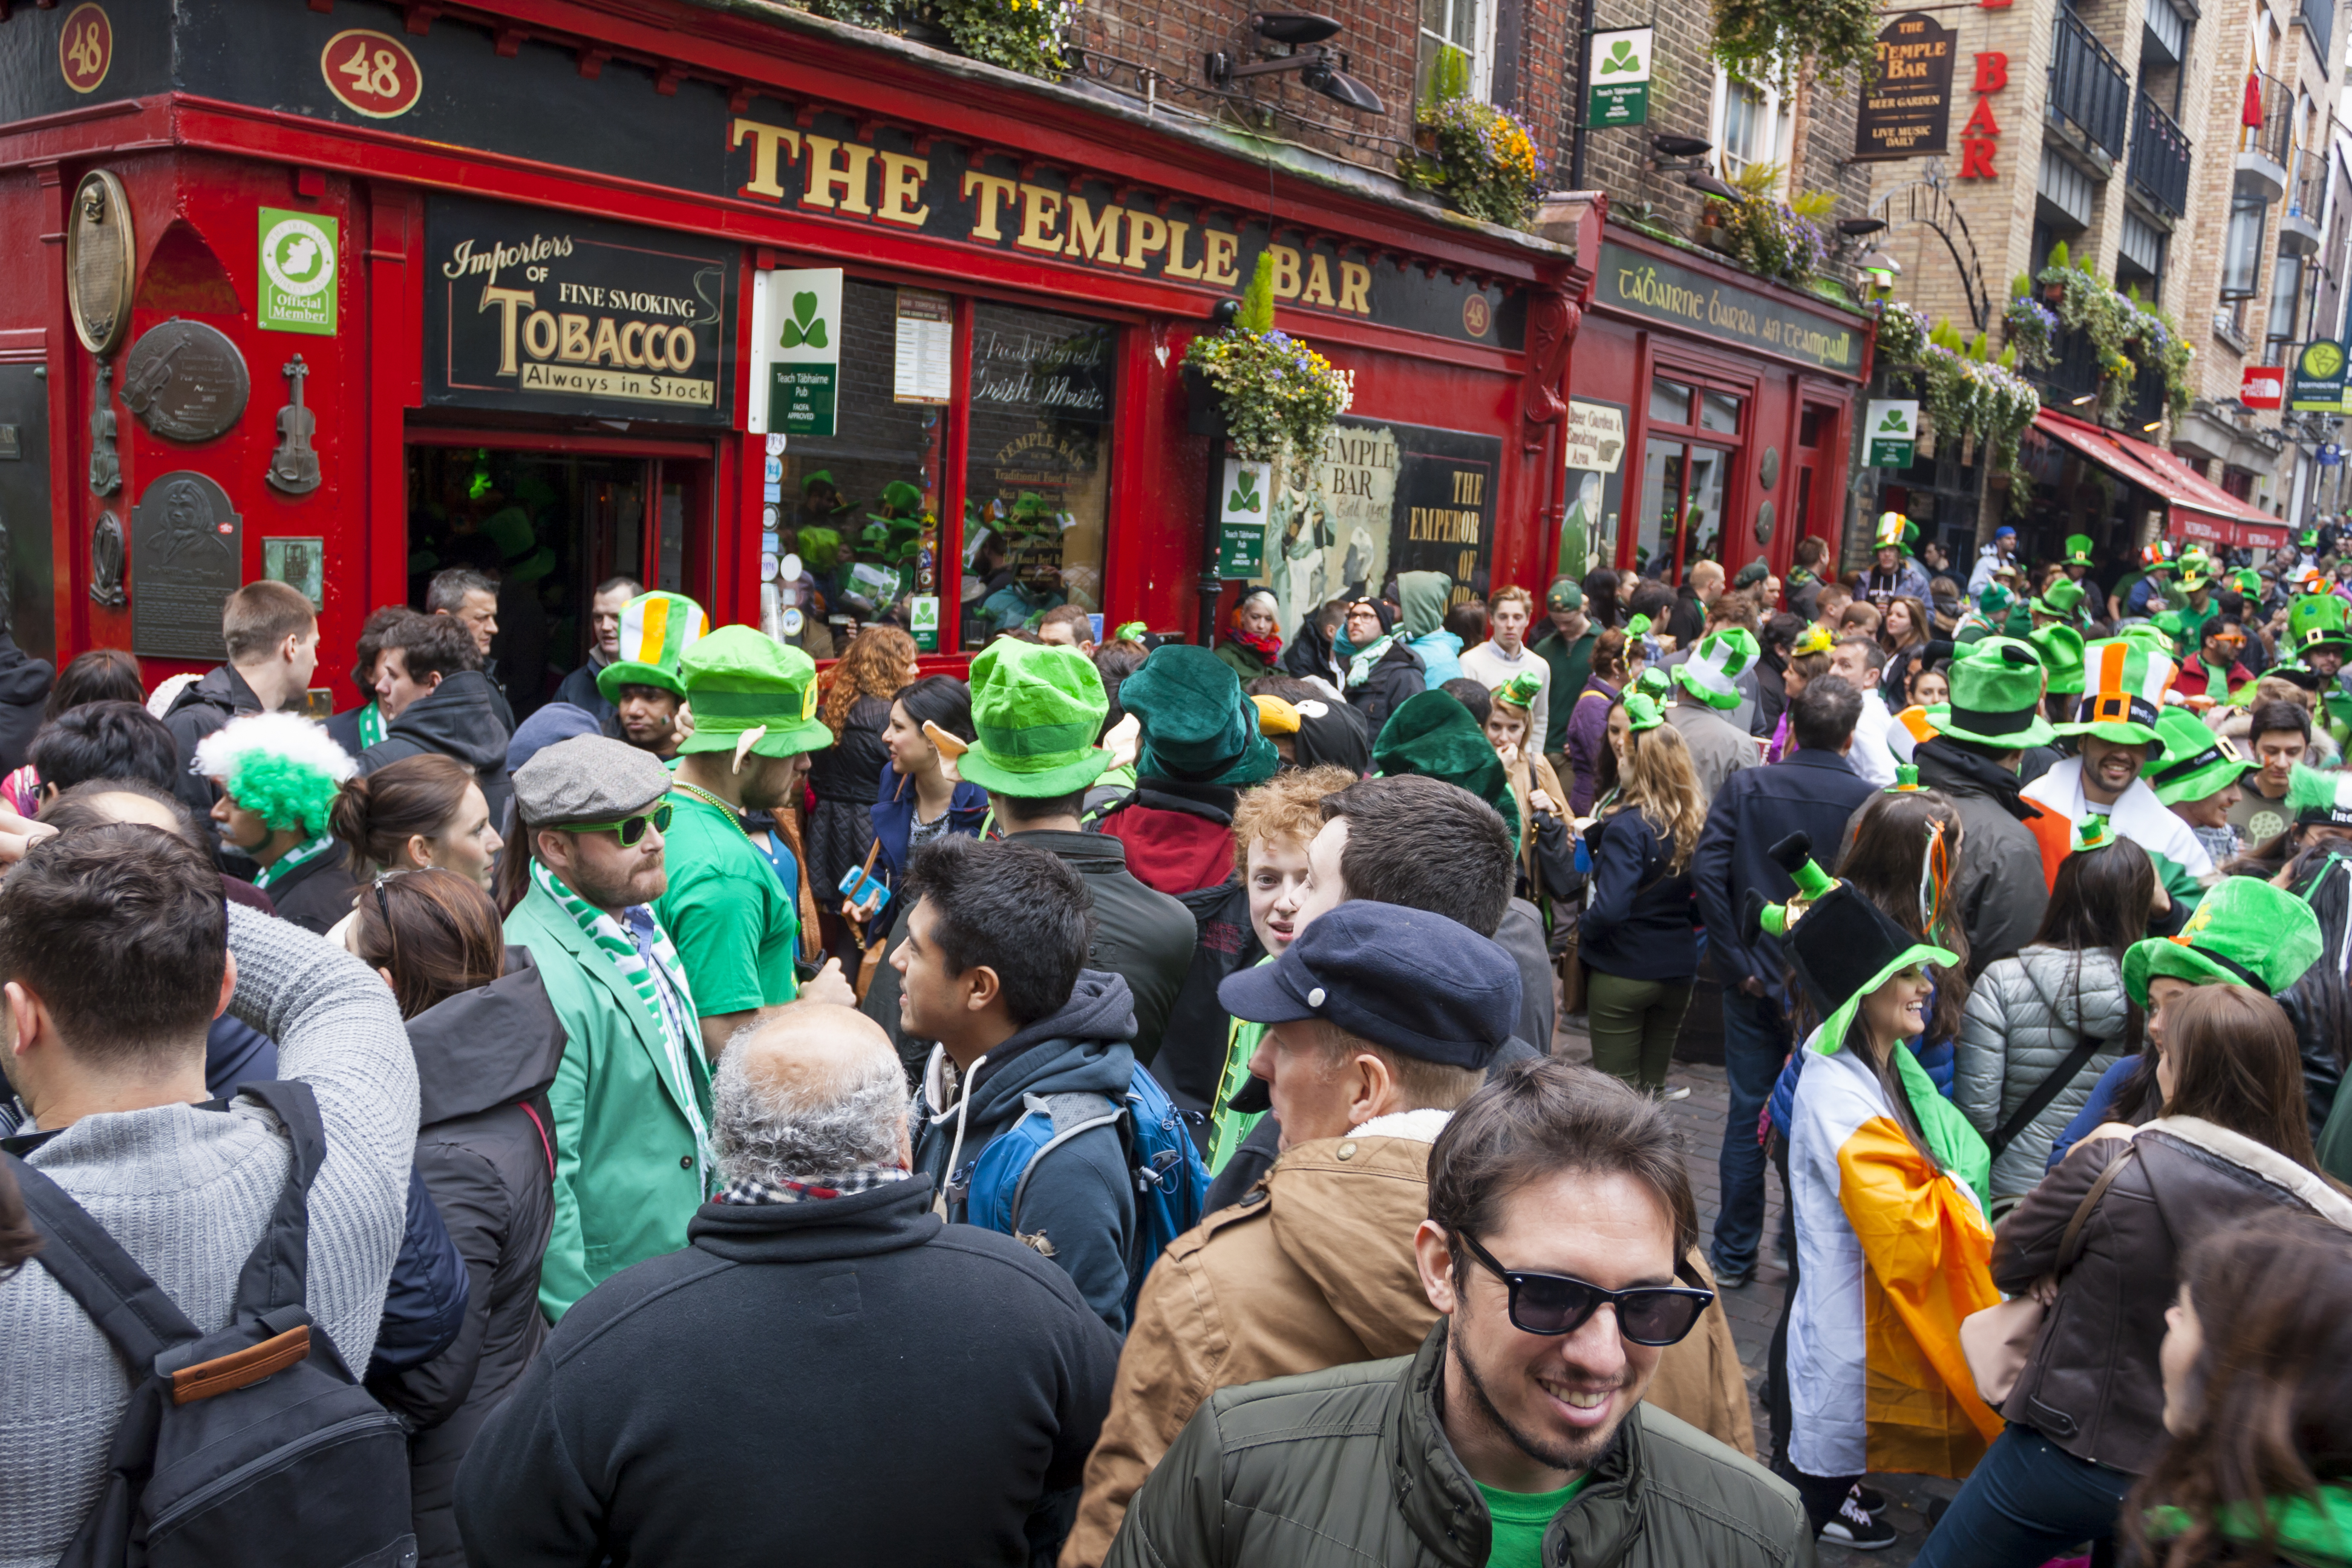 Check Out These Amazing Festivals in Ireland During Your Next Vacation - St. Patrick's Festival in Dublin